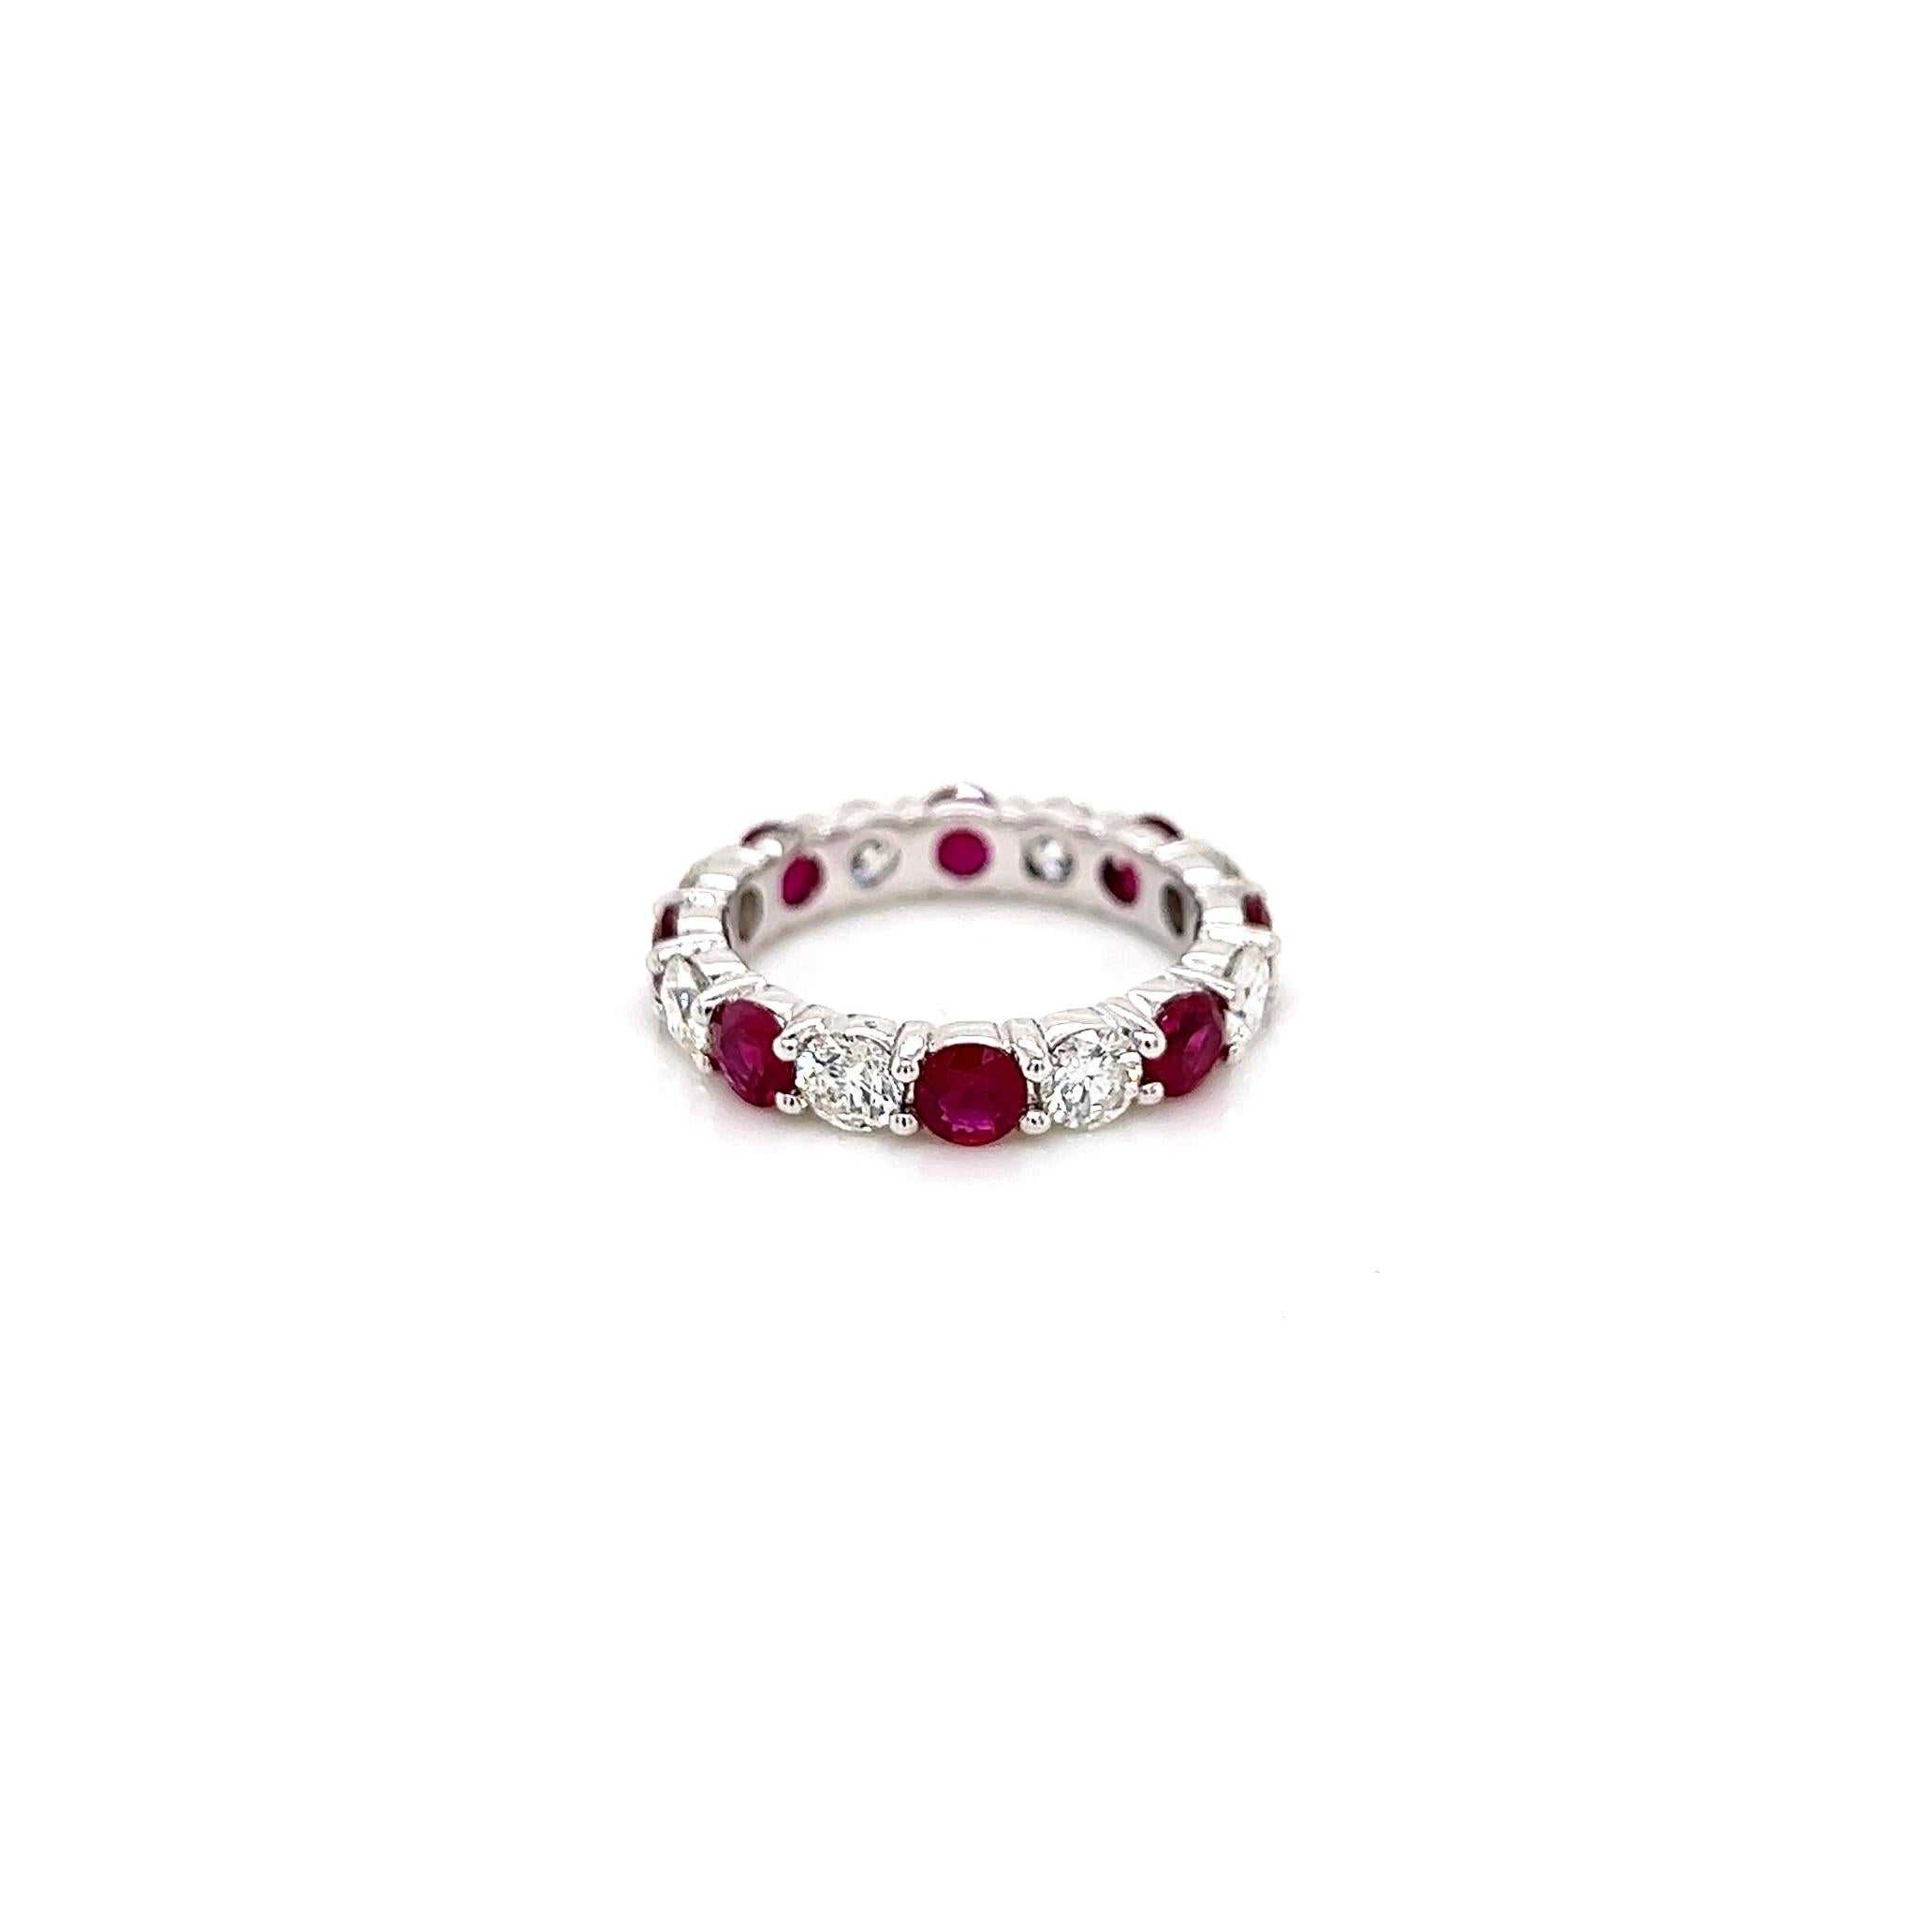 3.52Carat Ruby and Diamond Eternity Band

-Metal Type: 18K White Gold 
-2.02Carat Round Cut Ruby 
-1.50Carat Round Natural Diamonds
-Size 6.0


Made in New York City